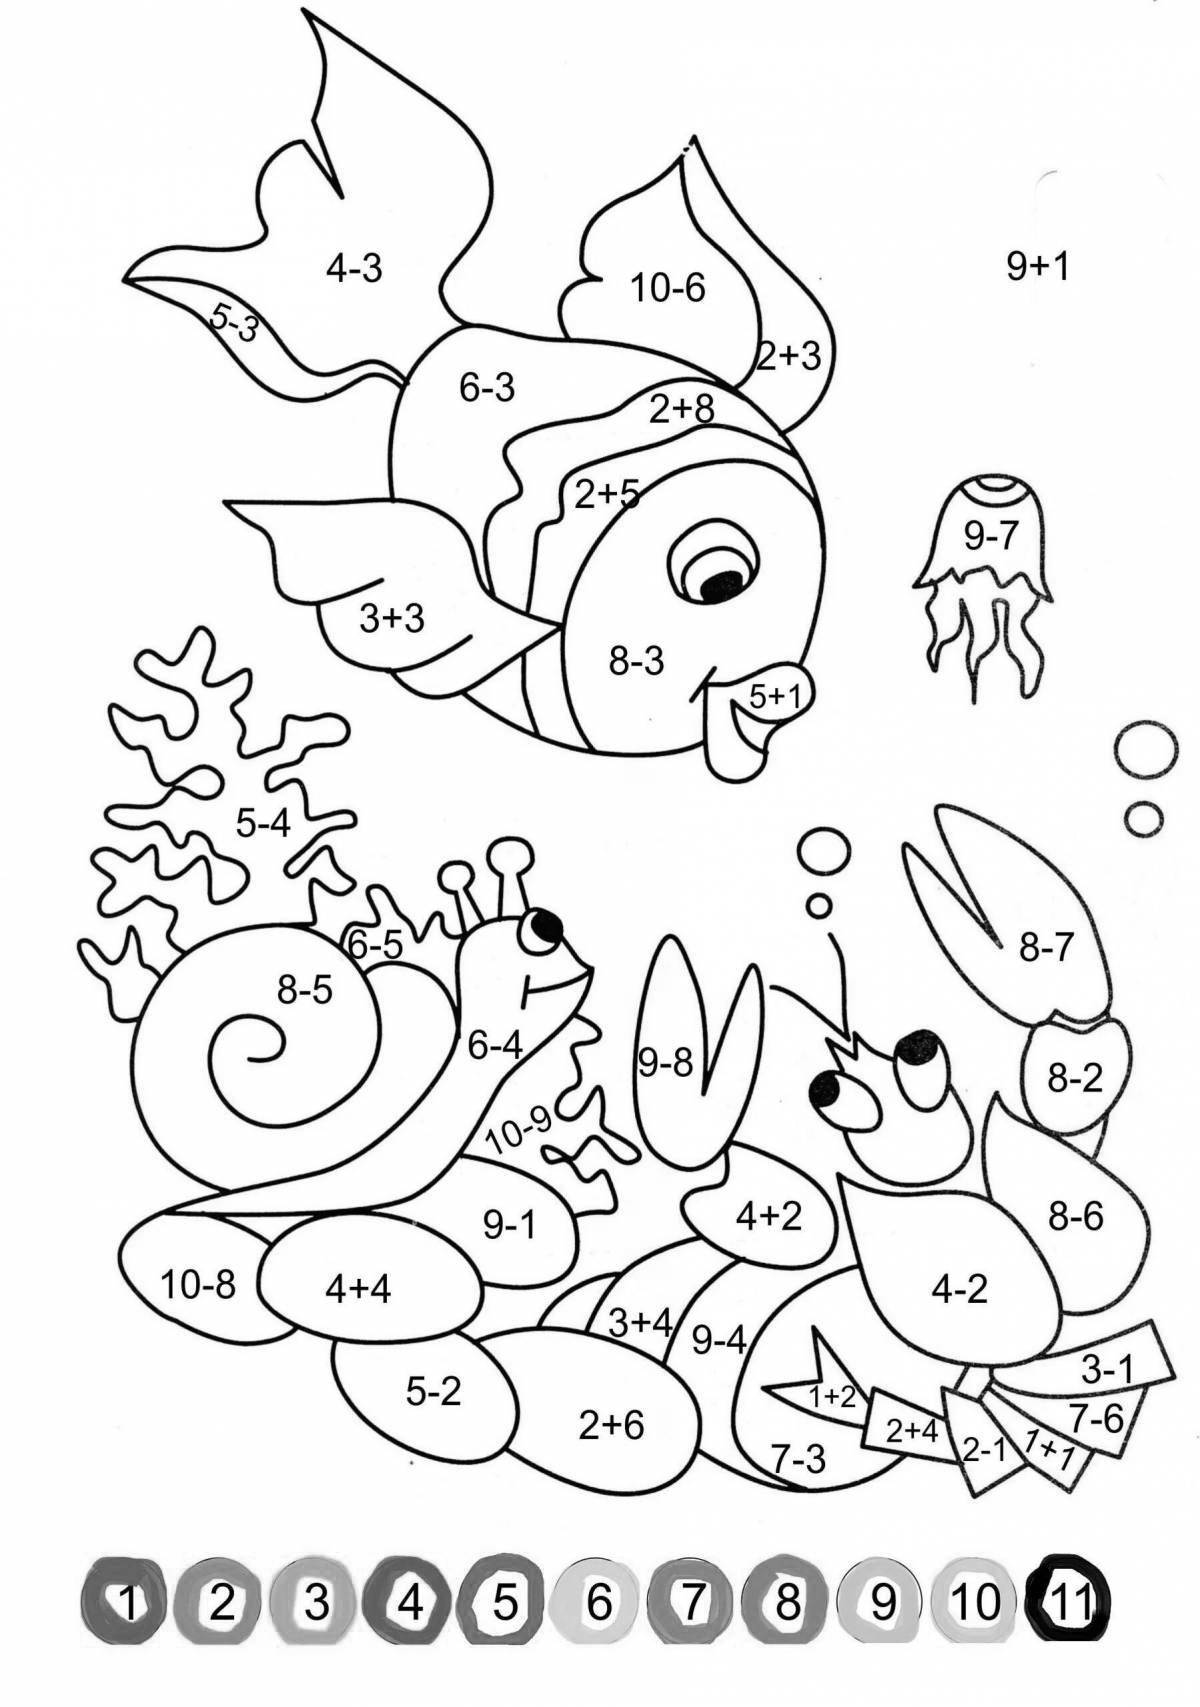 Color-frenzy coloring page examples for kids